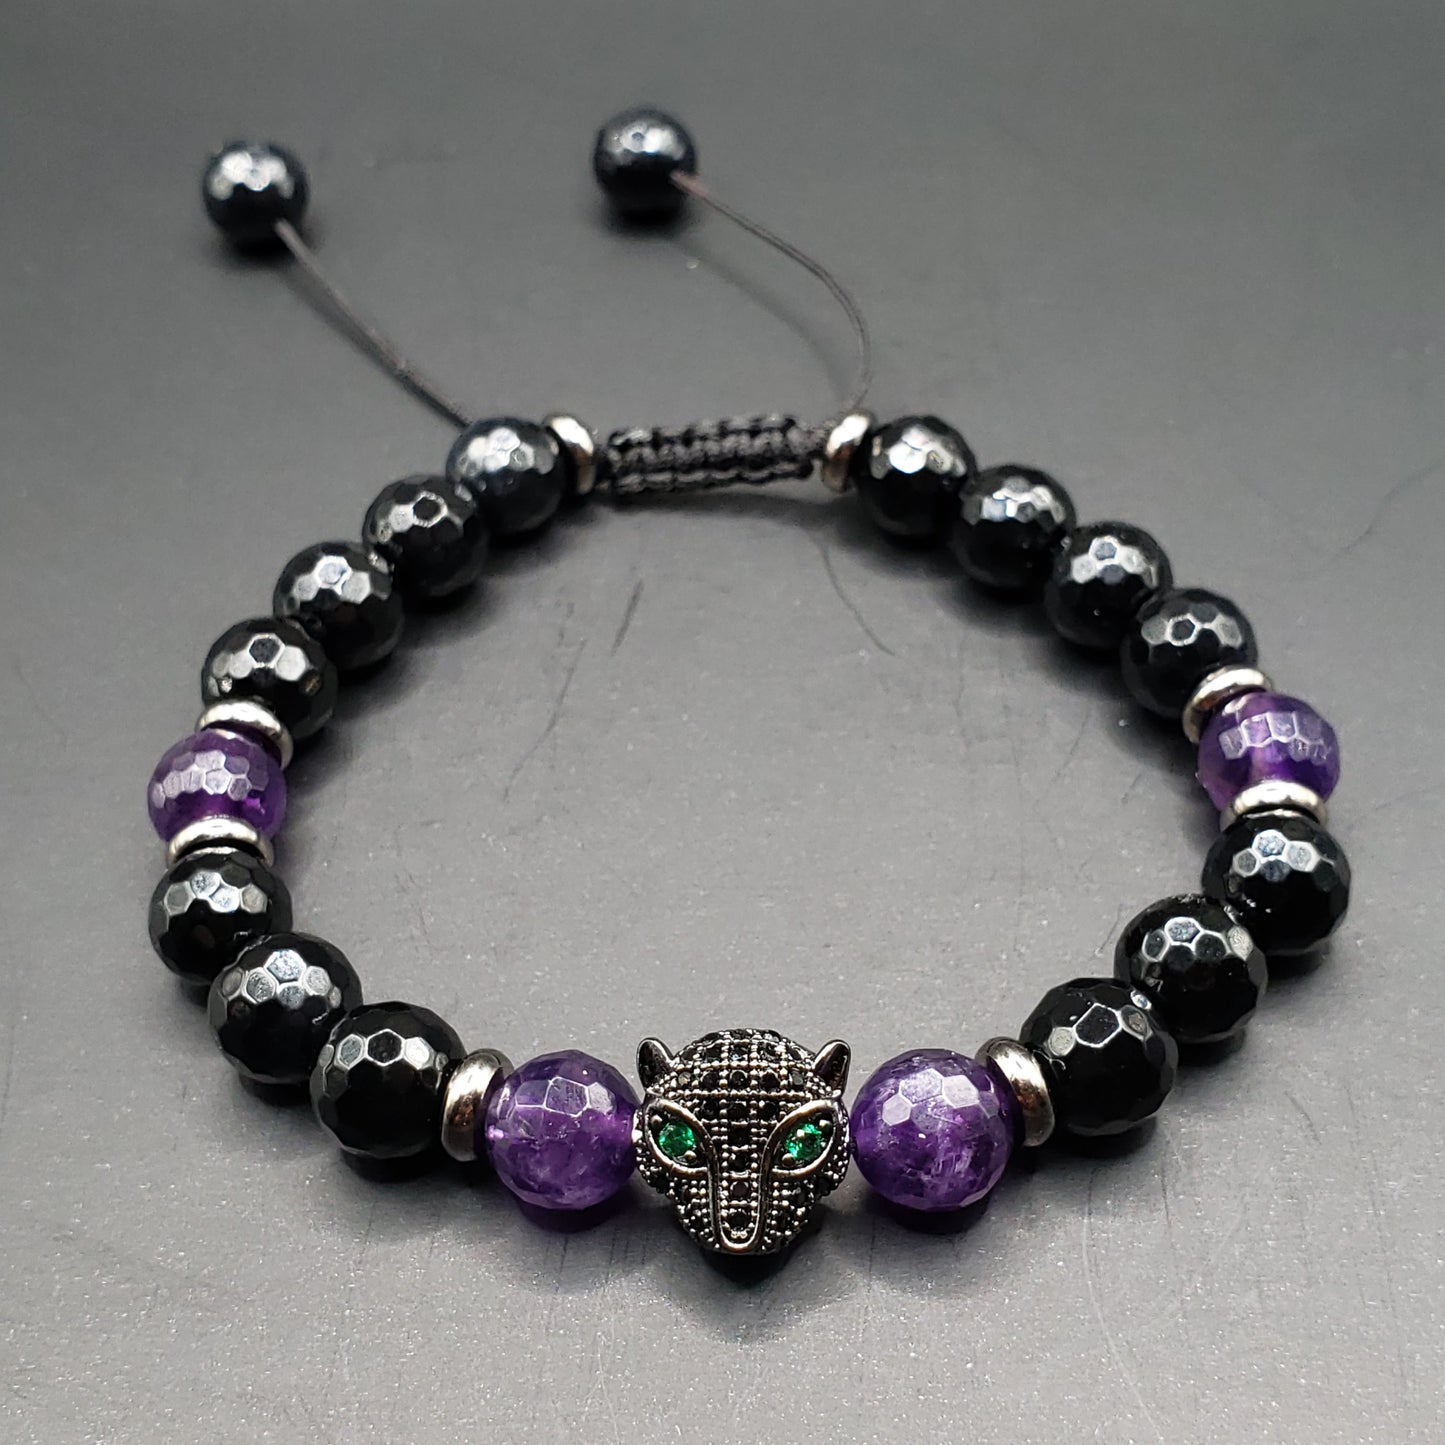 Black Panther Bracelet with Faceted Onyx and Amethyst